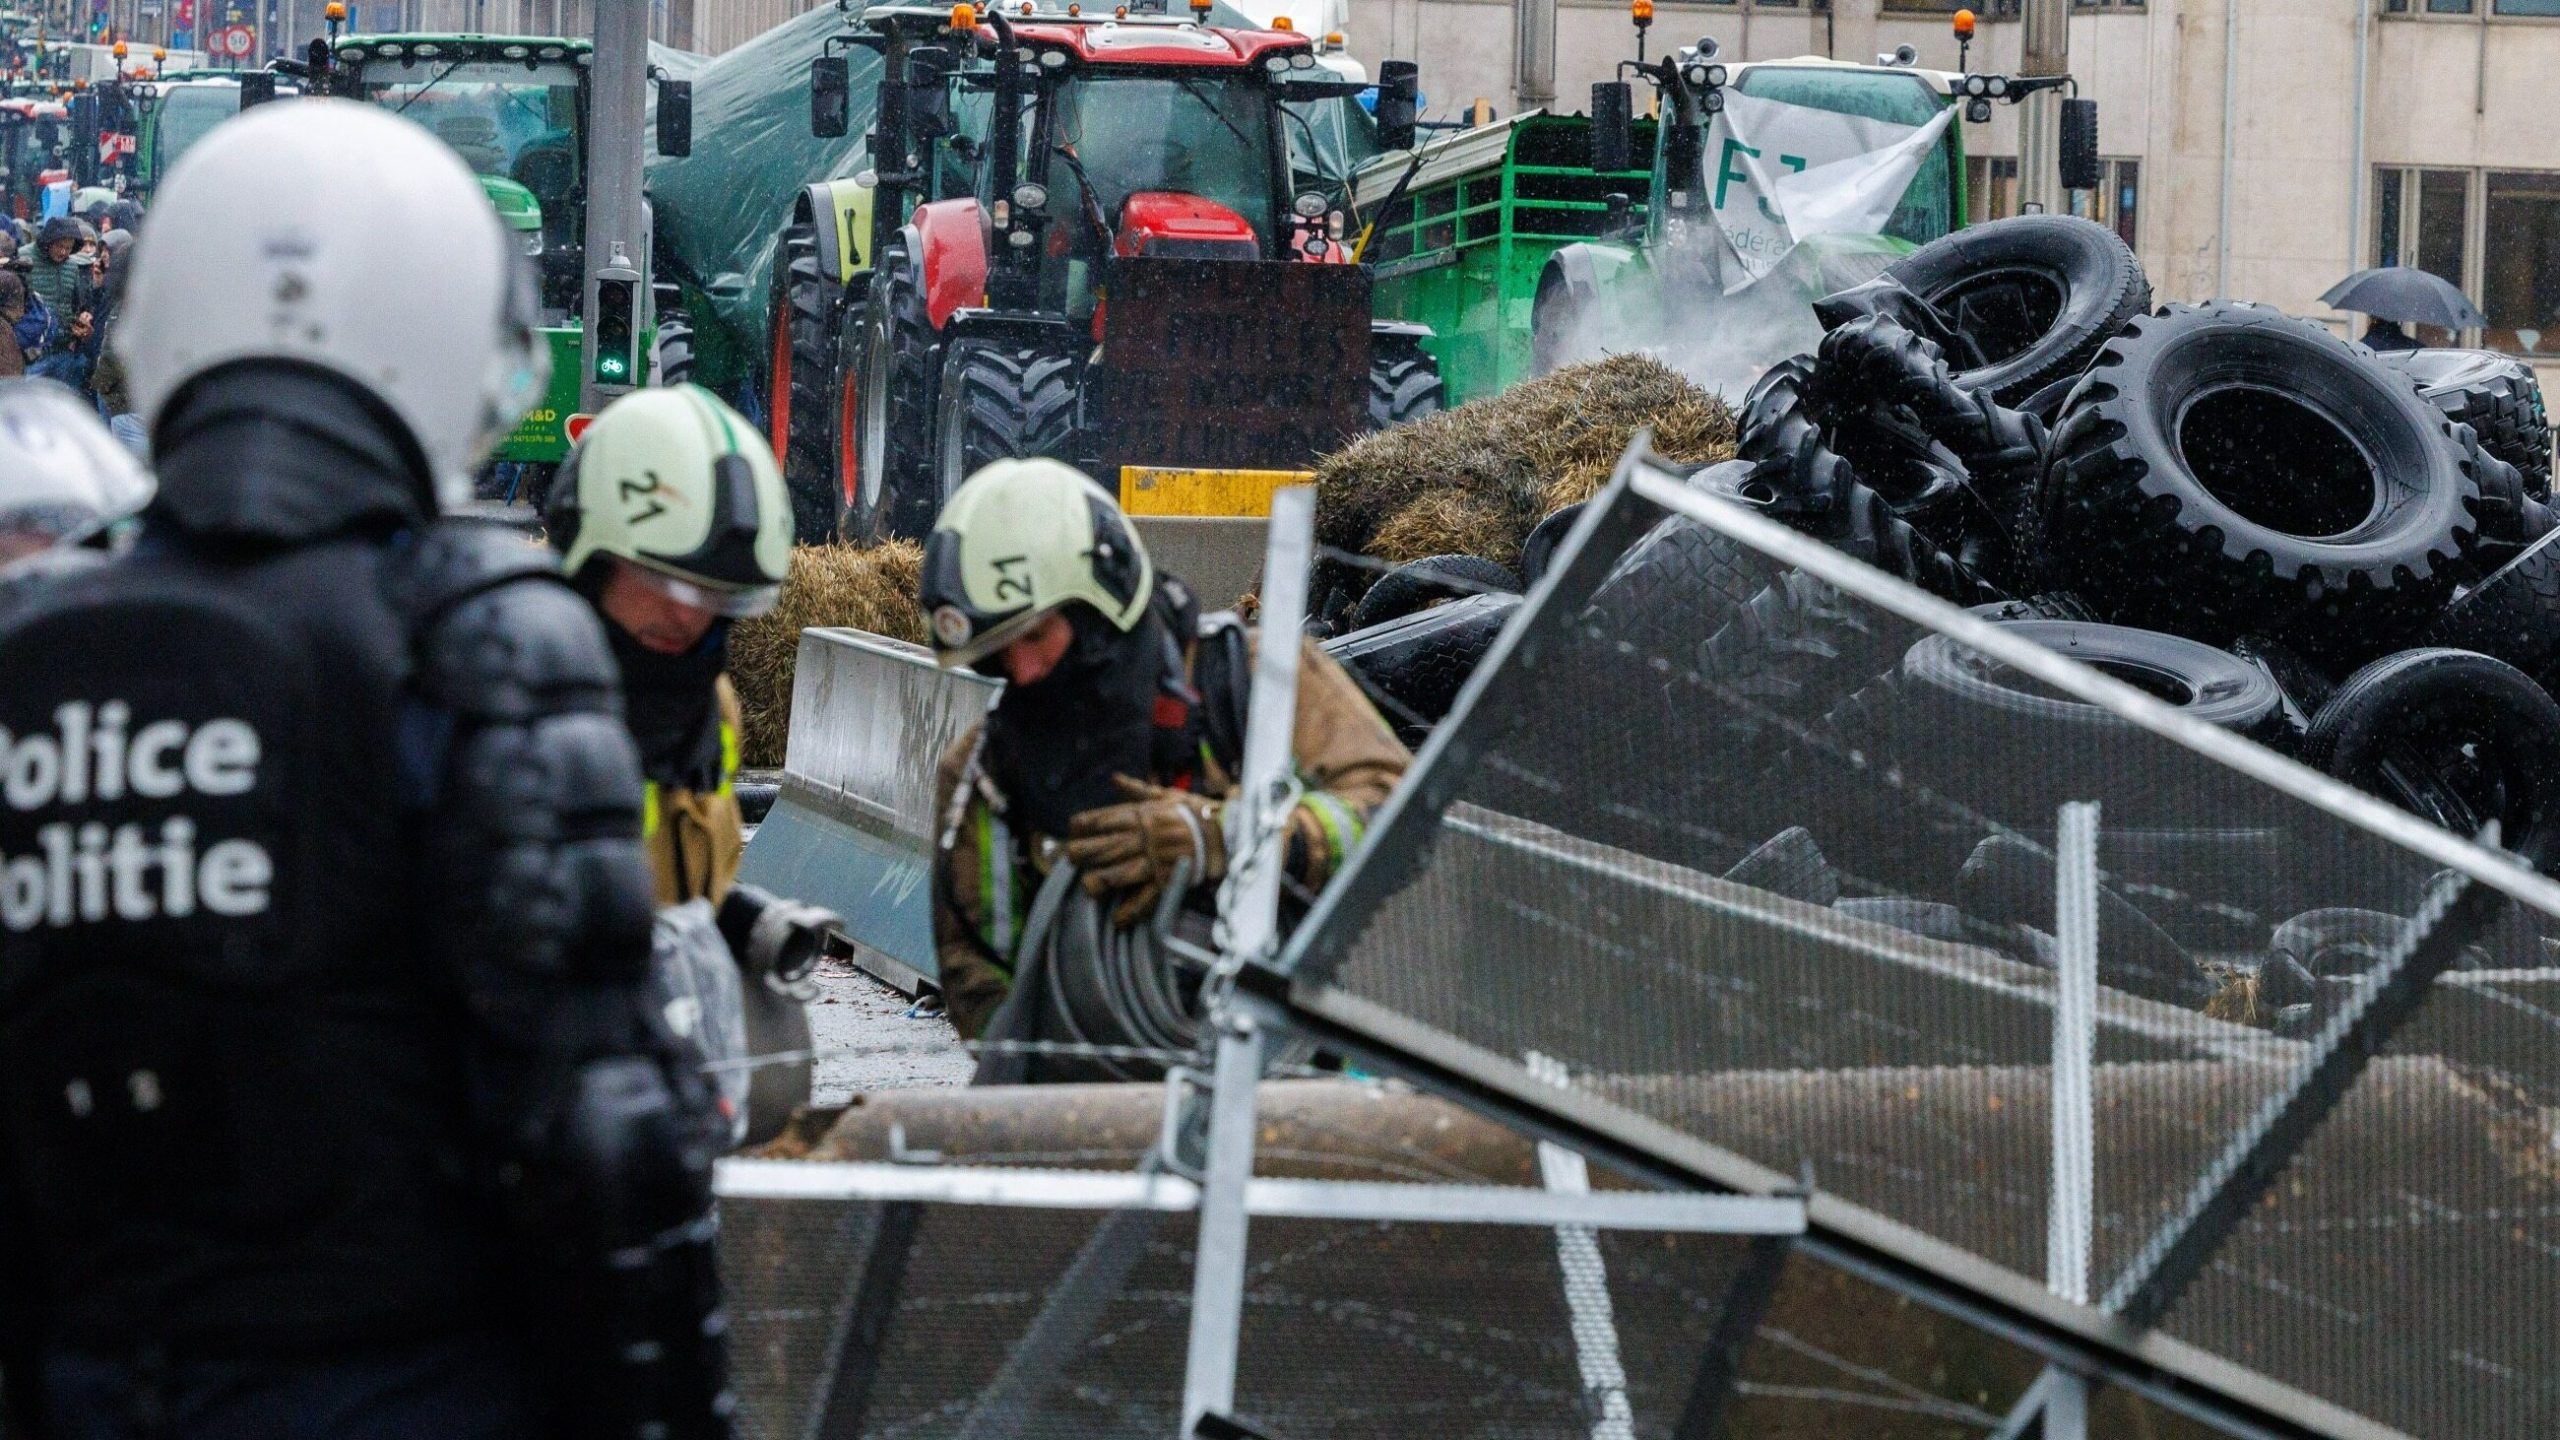 Burning tires, scattered manure.  This is what the farmers' protests in Brussels looked like